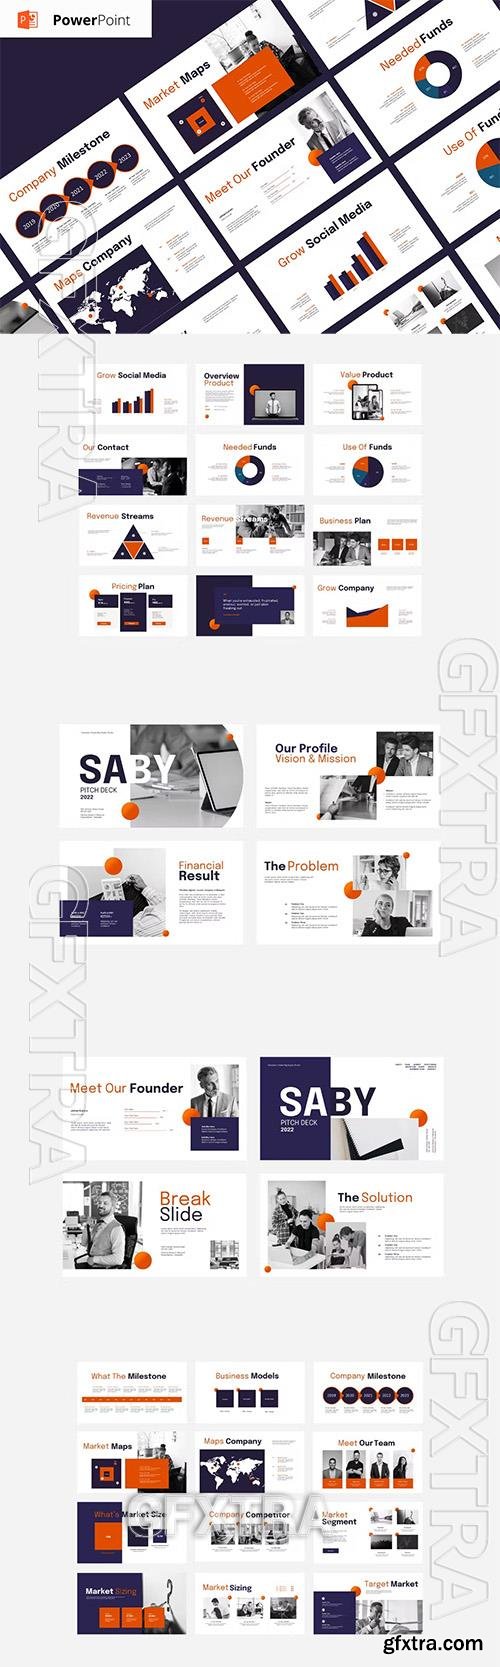 Saby - Powerpoint Pitch Deck Presentation Template CQP5LUP